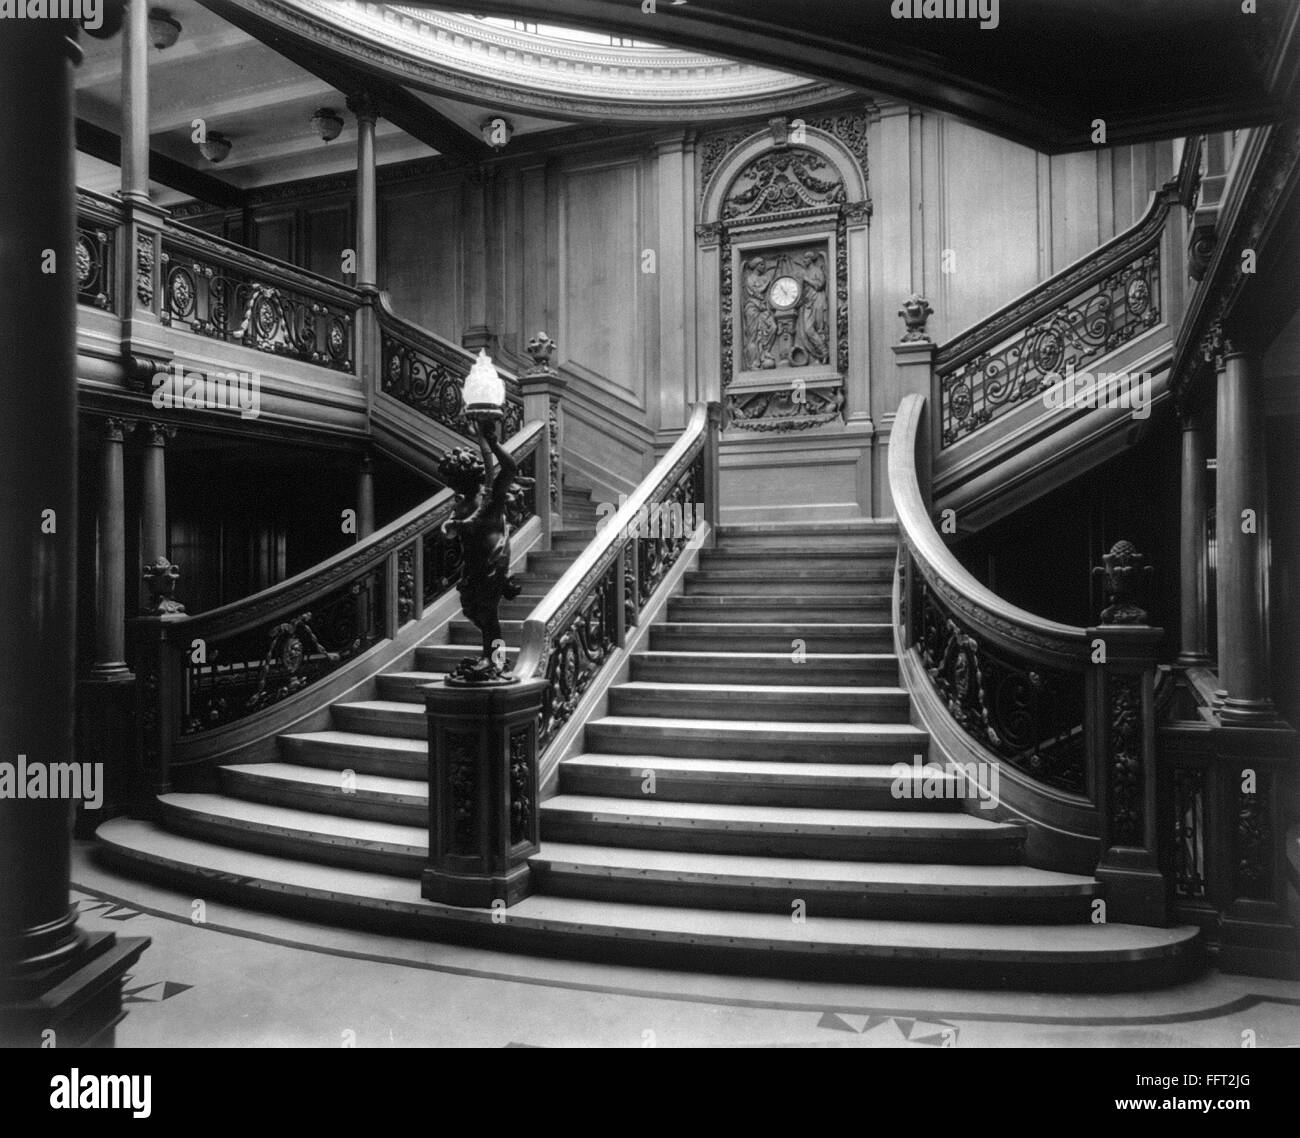 STEAMSHIP: STAIRCASE, c1911. /nThe interior of the Grand Stairway, second landing of the RMS 'Olympic.' Photograph, c1911. Stock Photo